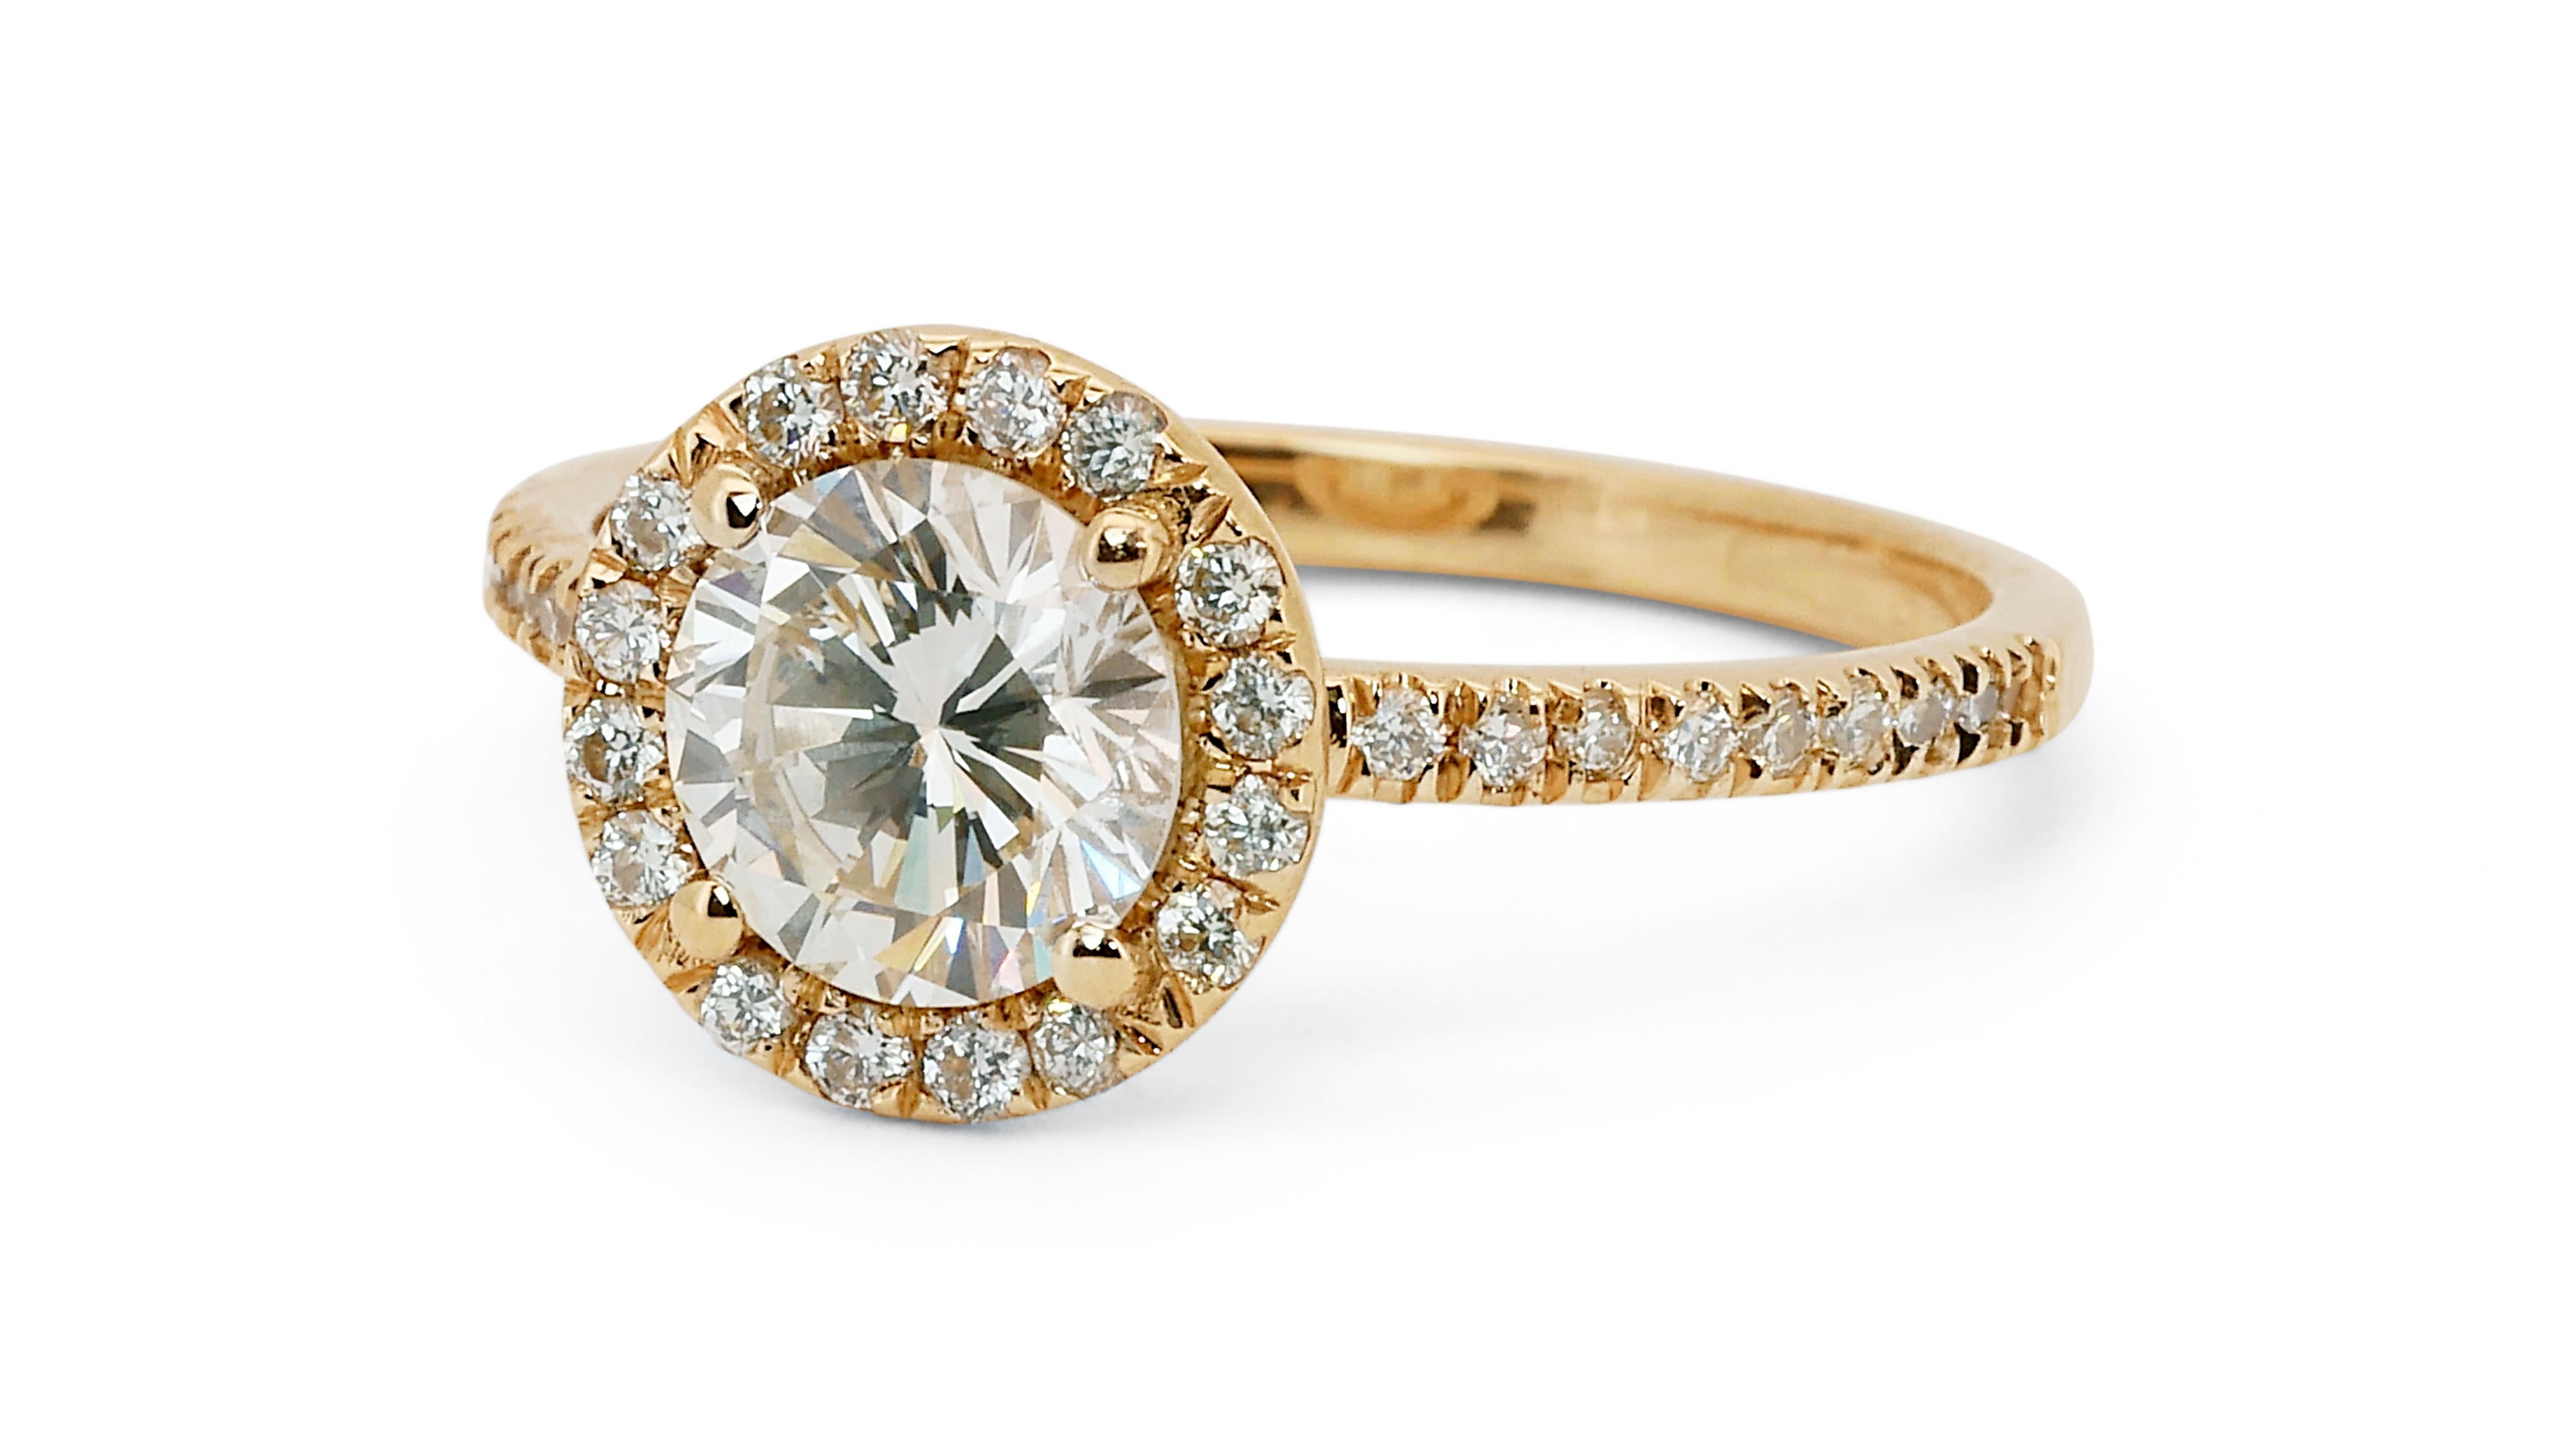 A gorgeous halo cluster ring with a dazzling 1.05 carat round brilliant natural diamond. It has 0.30 carat of side diamonds which add more to its elegance. The jewelry is made of 18K Yellow Gold with a high quality polish. It comes with IGI